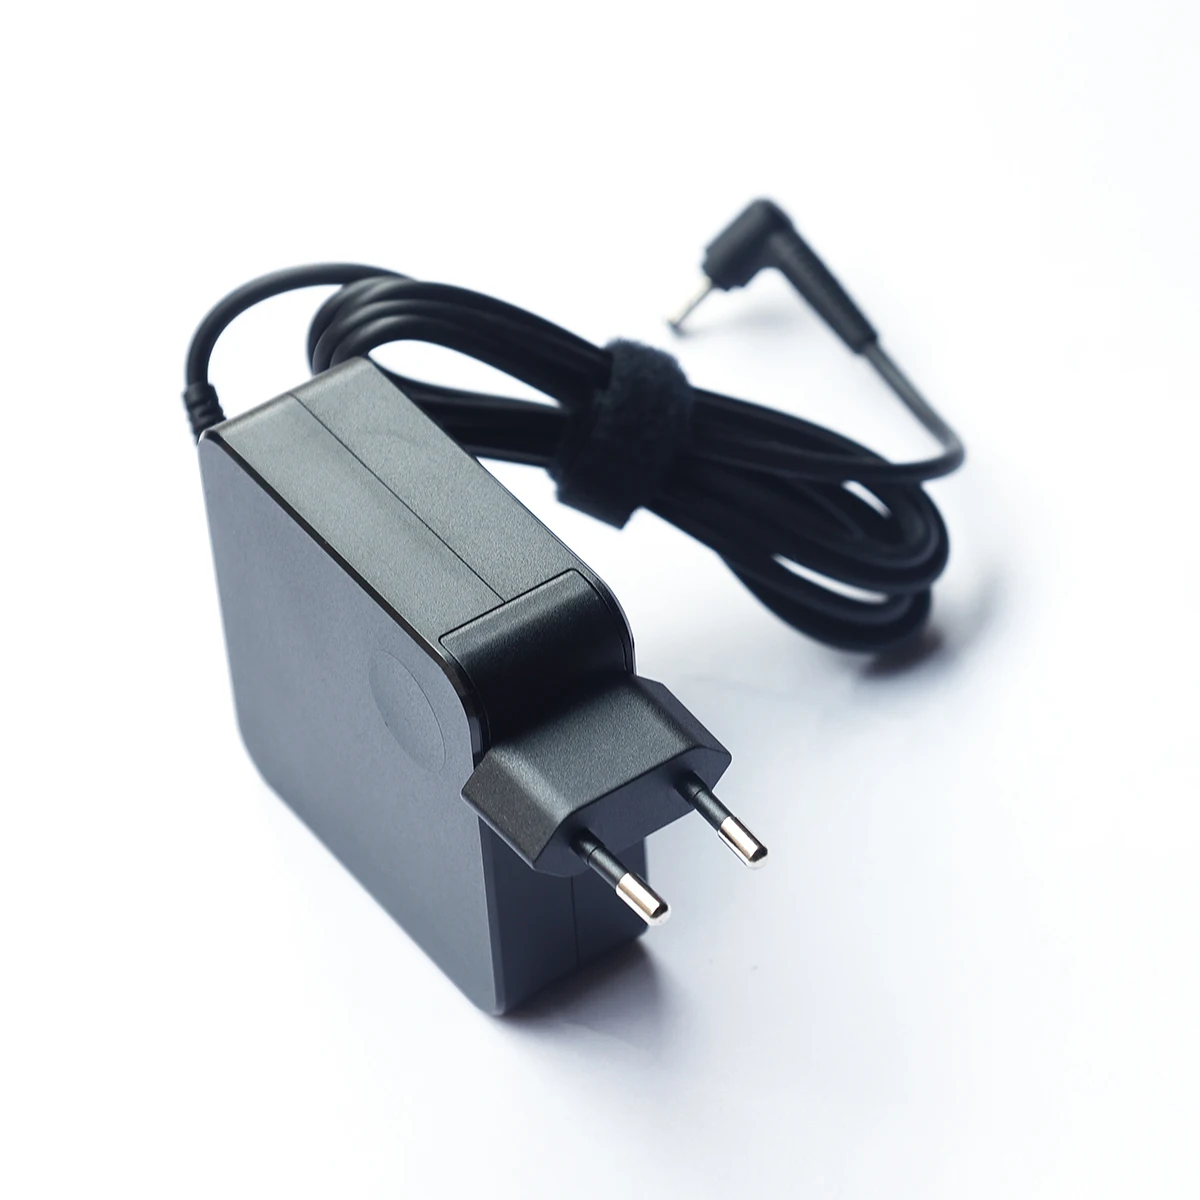 CHARGEUR LENOVO 3.25 A - SYNOTEC